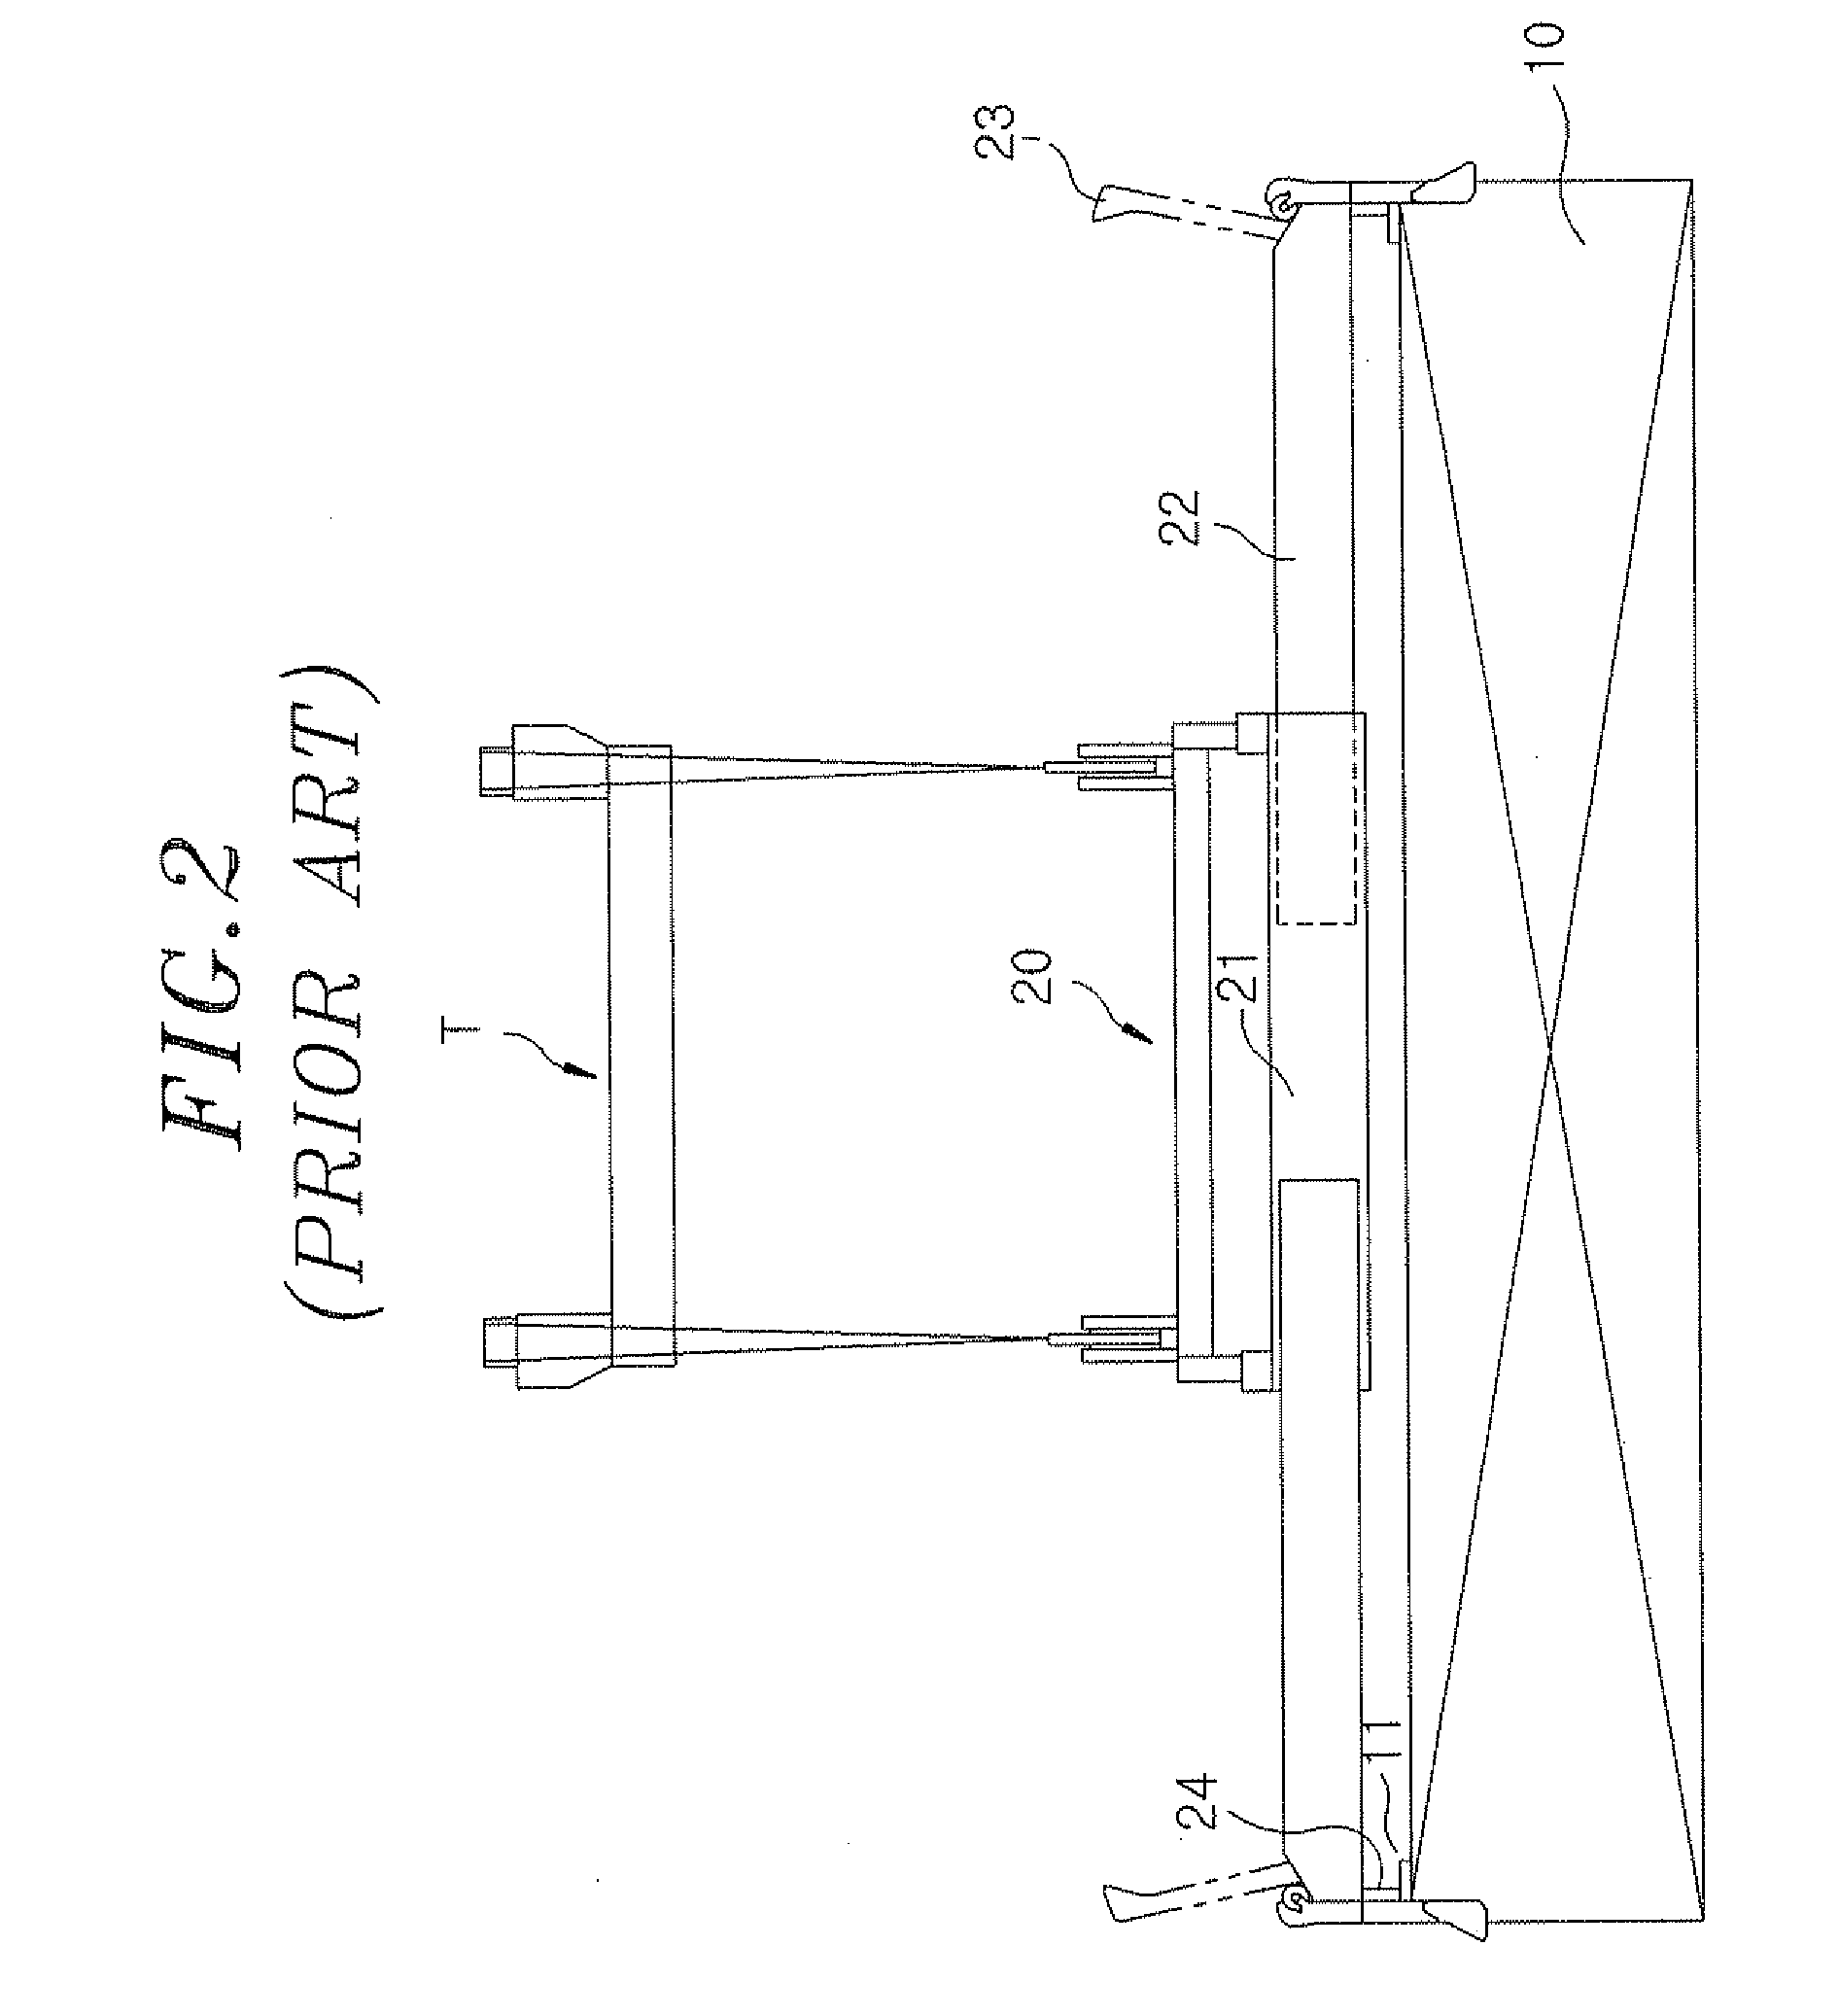 Crane spreader and method for automatically landing the same